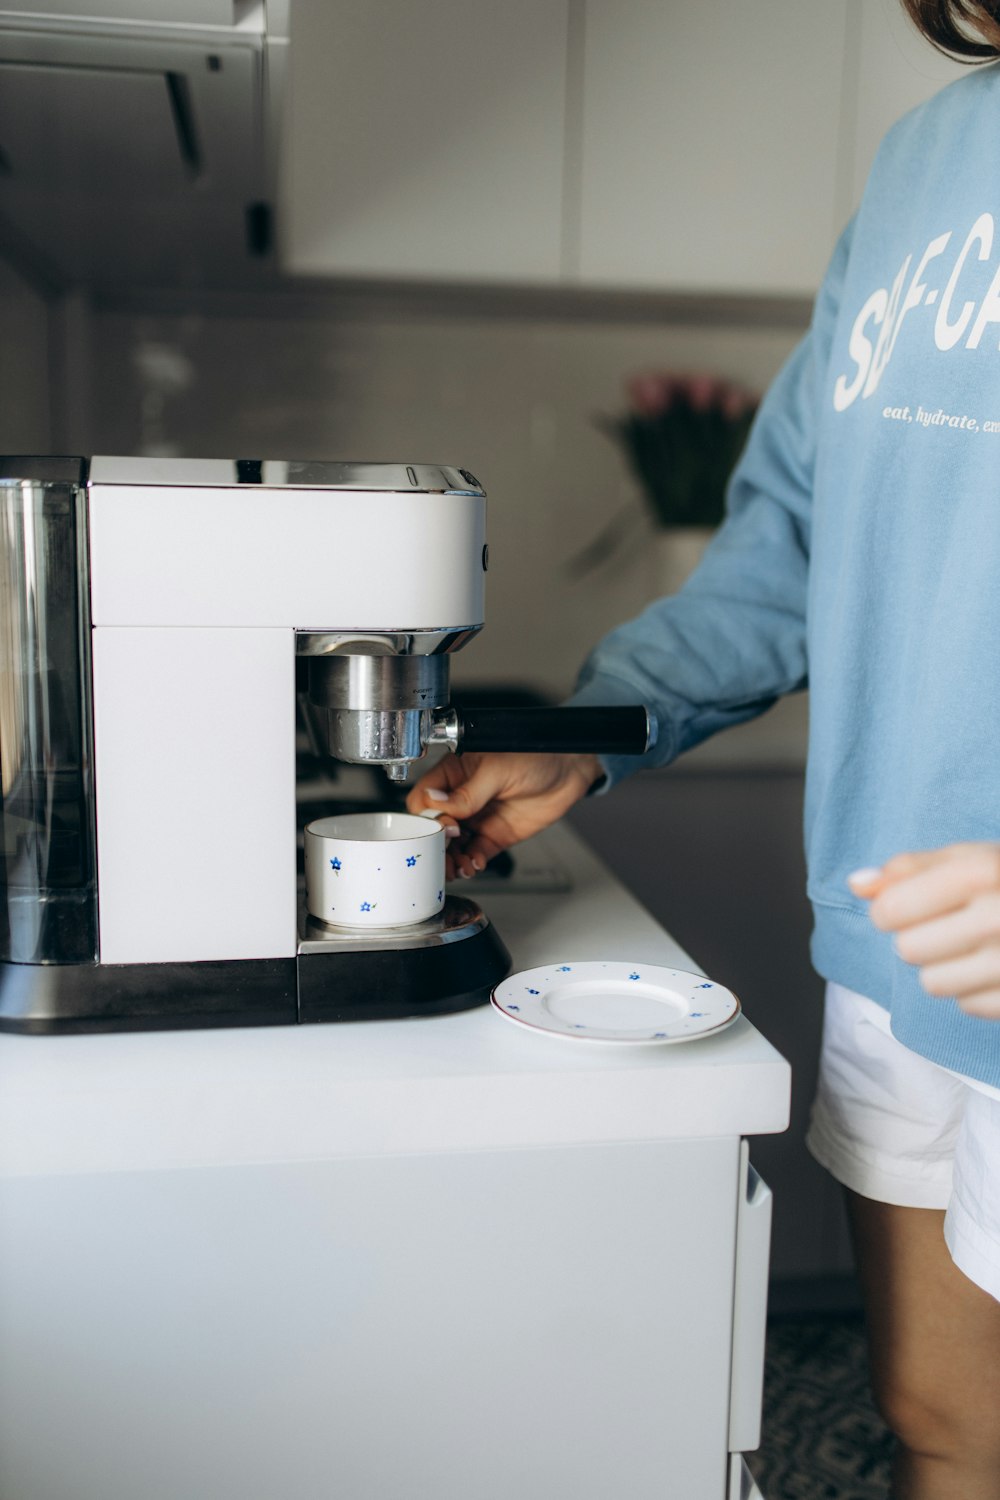 a woman in a blue shirt is using a coffee maker